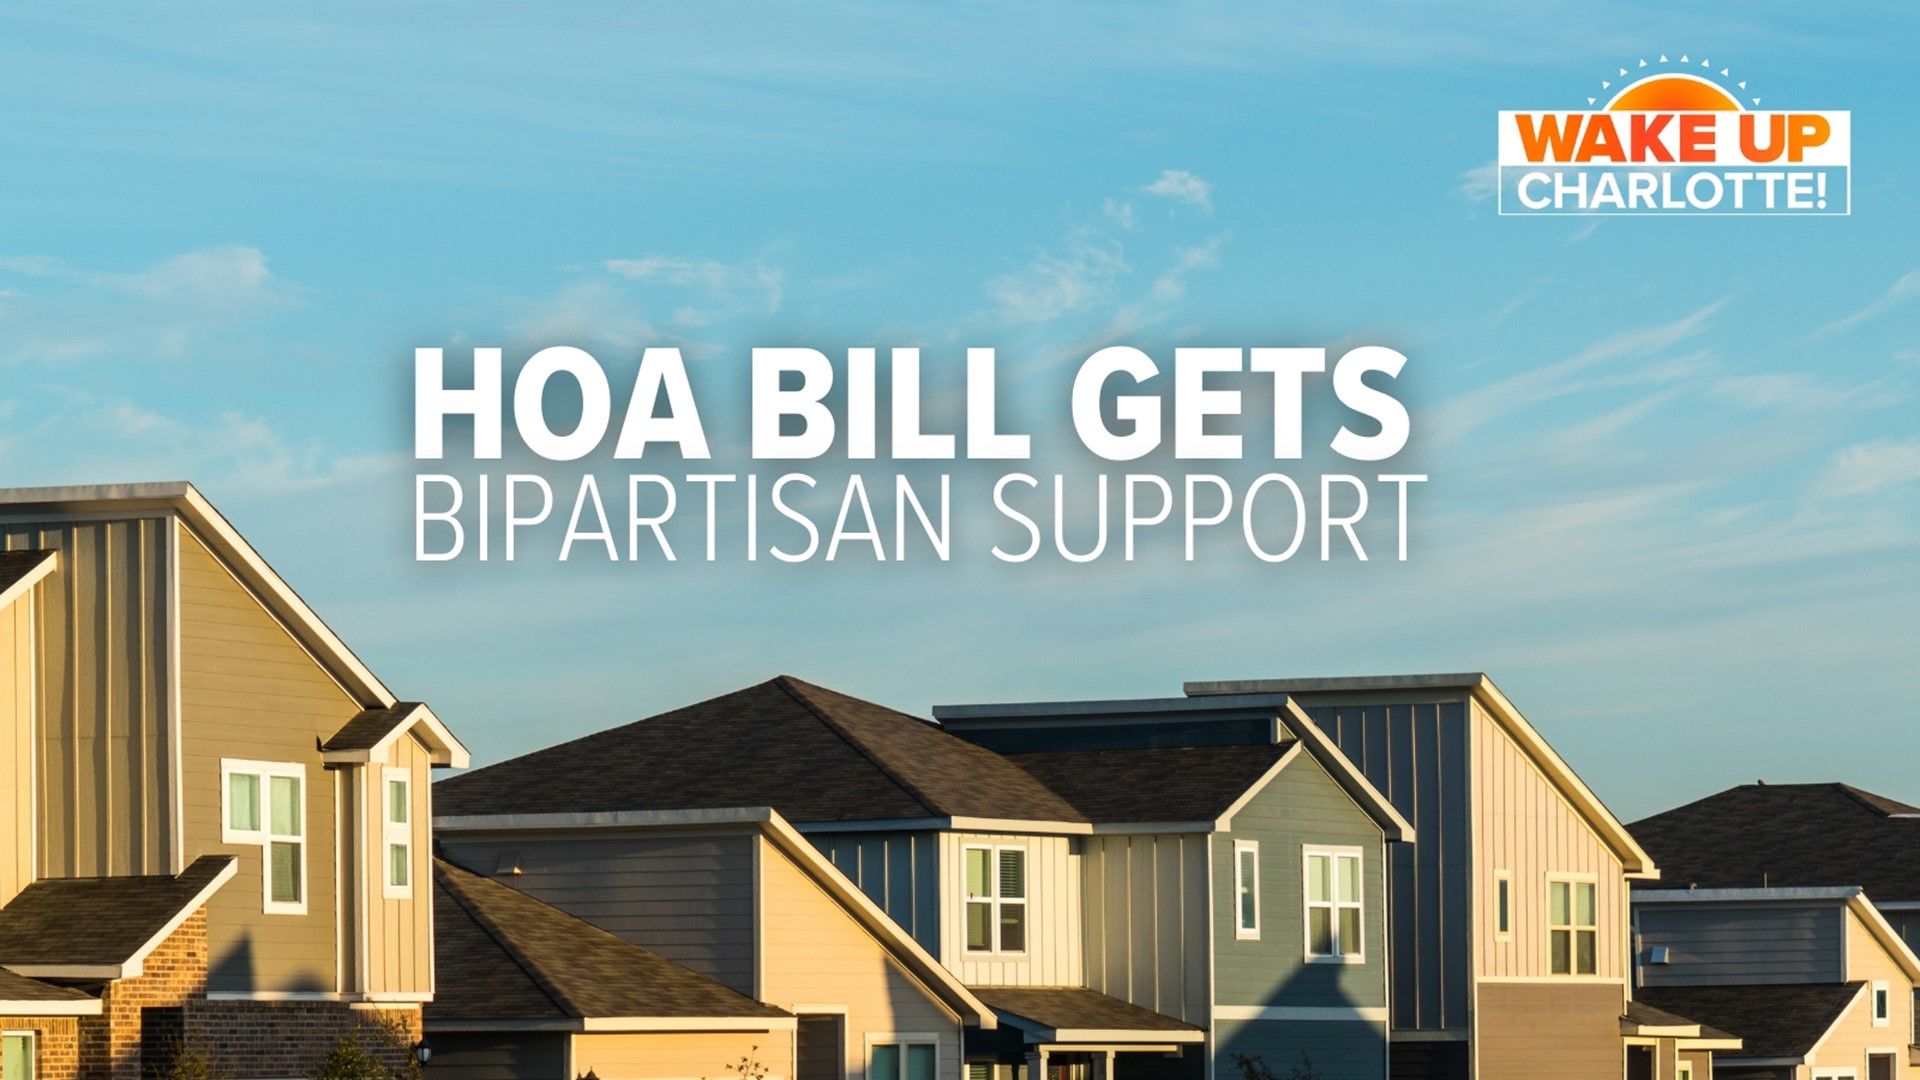 The state House recently created a whole new committee with an aim of conducting oversight of HOAs.